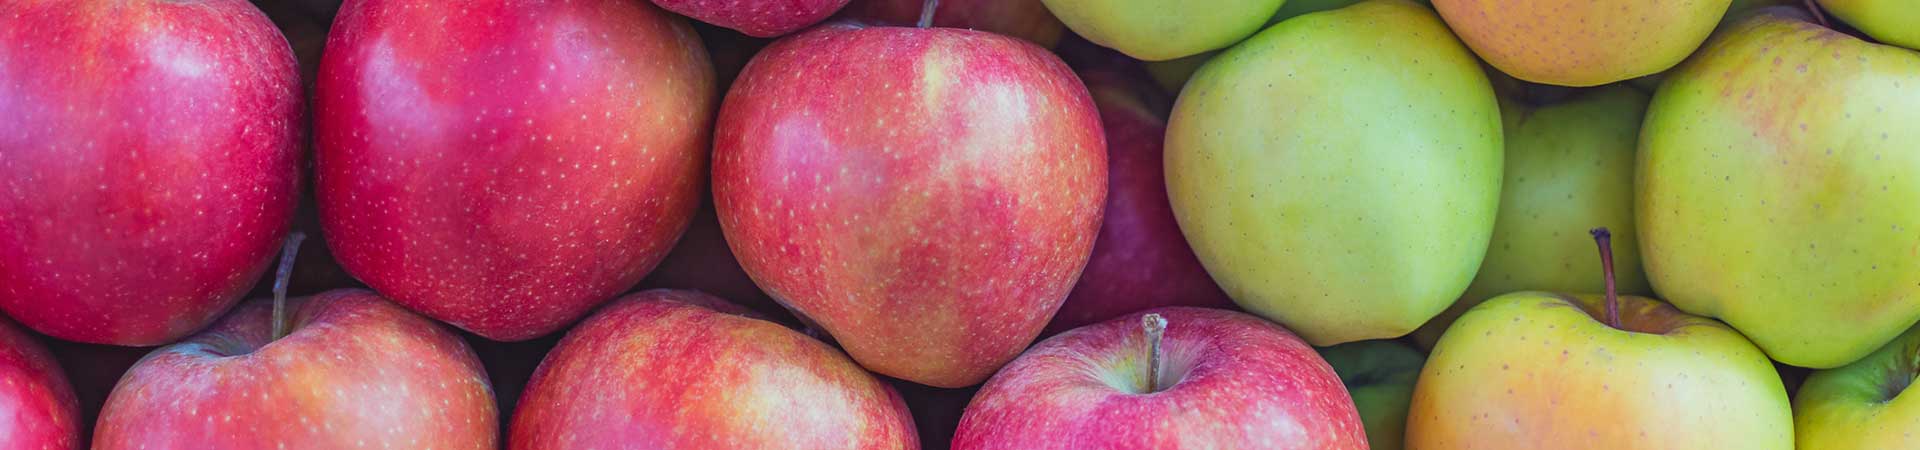 web-banner-apples-with-apples